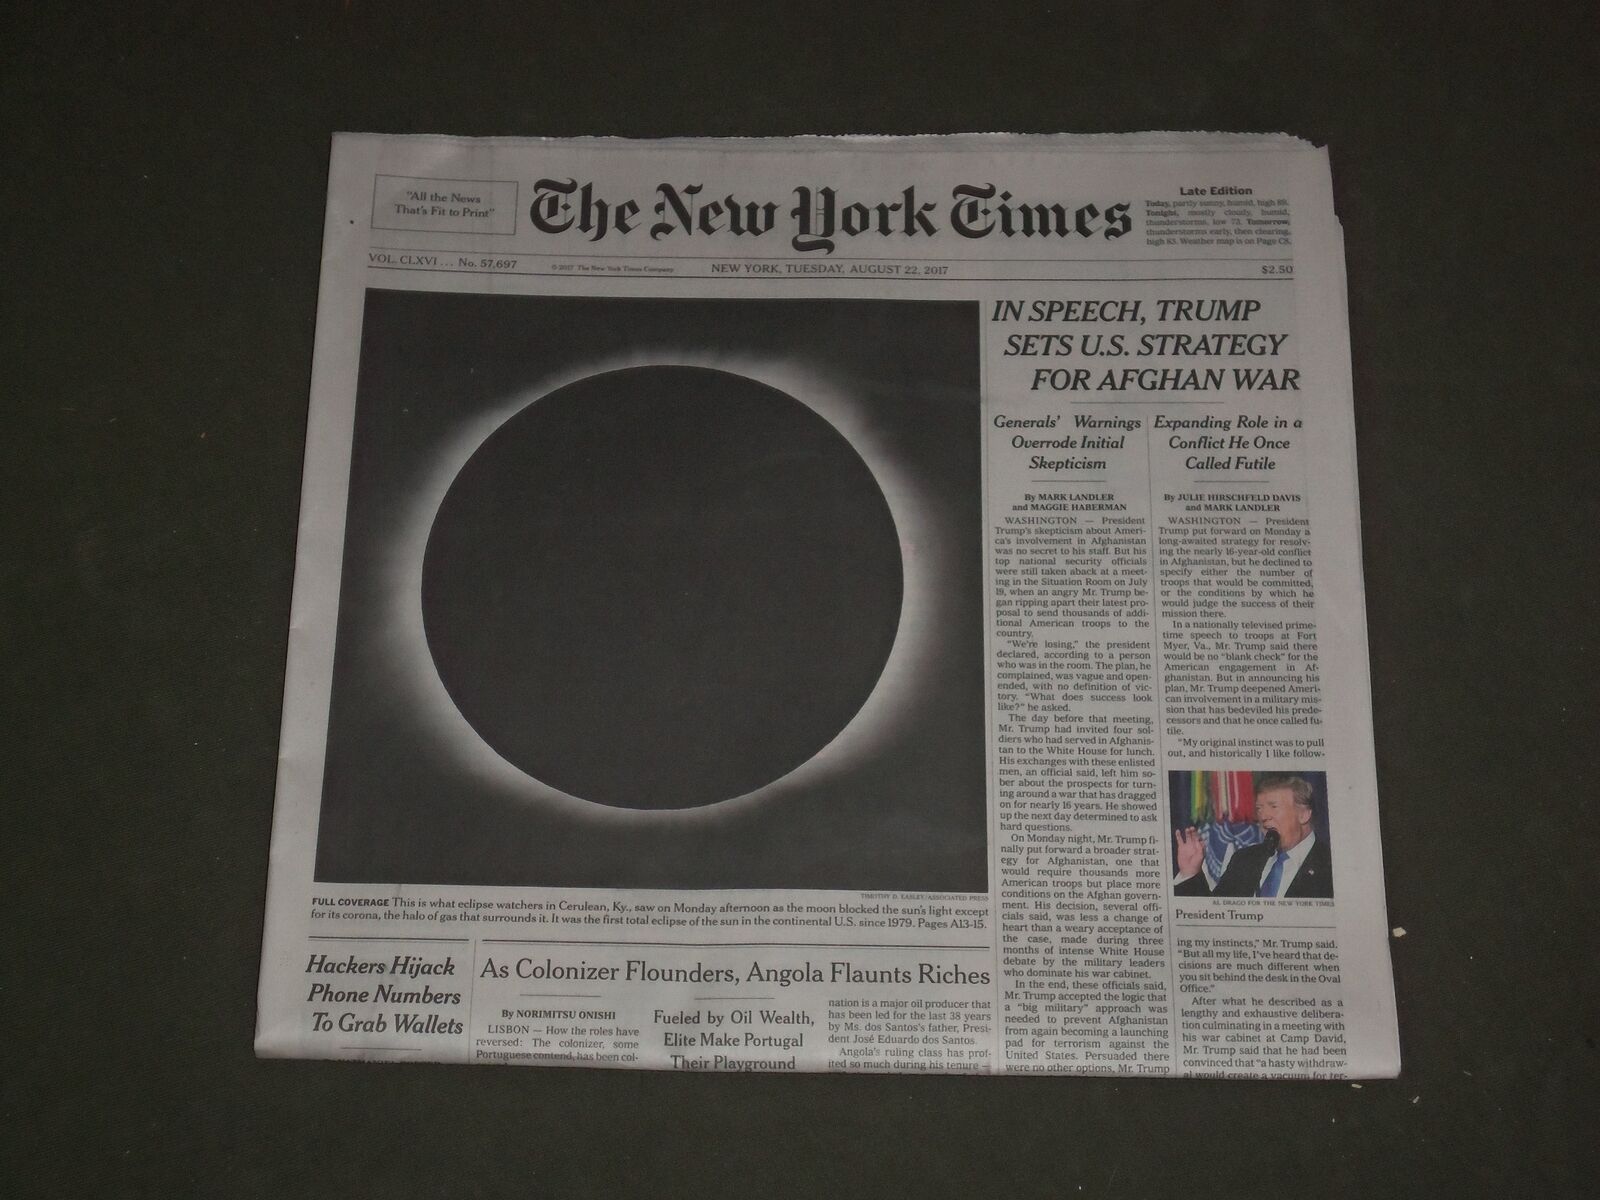 2017 AUGUST 22 NEW YORK TIMES-TRUMP STRATEGY FOR AFGHAN WAR-TOTAL ECLIPSE OF SUN